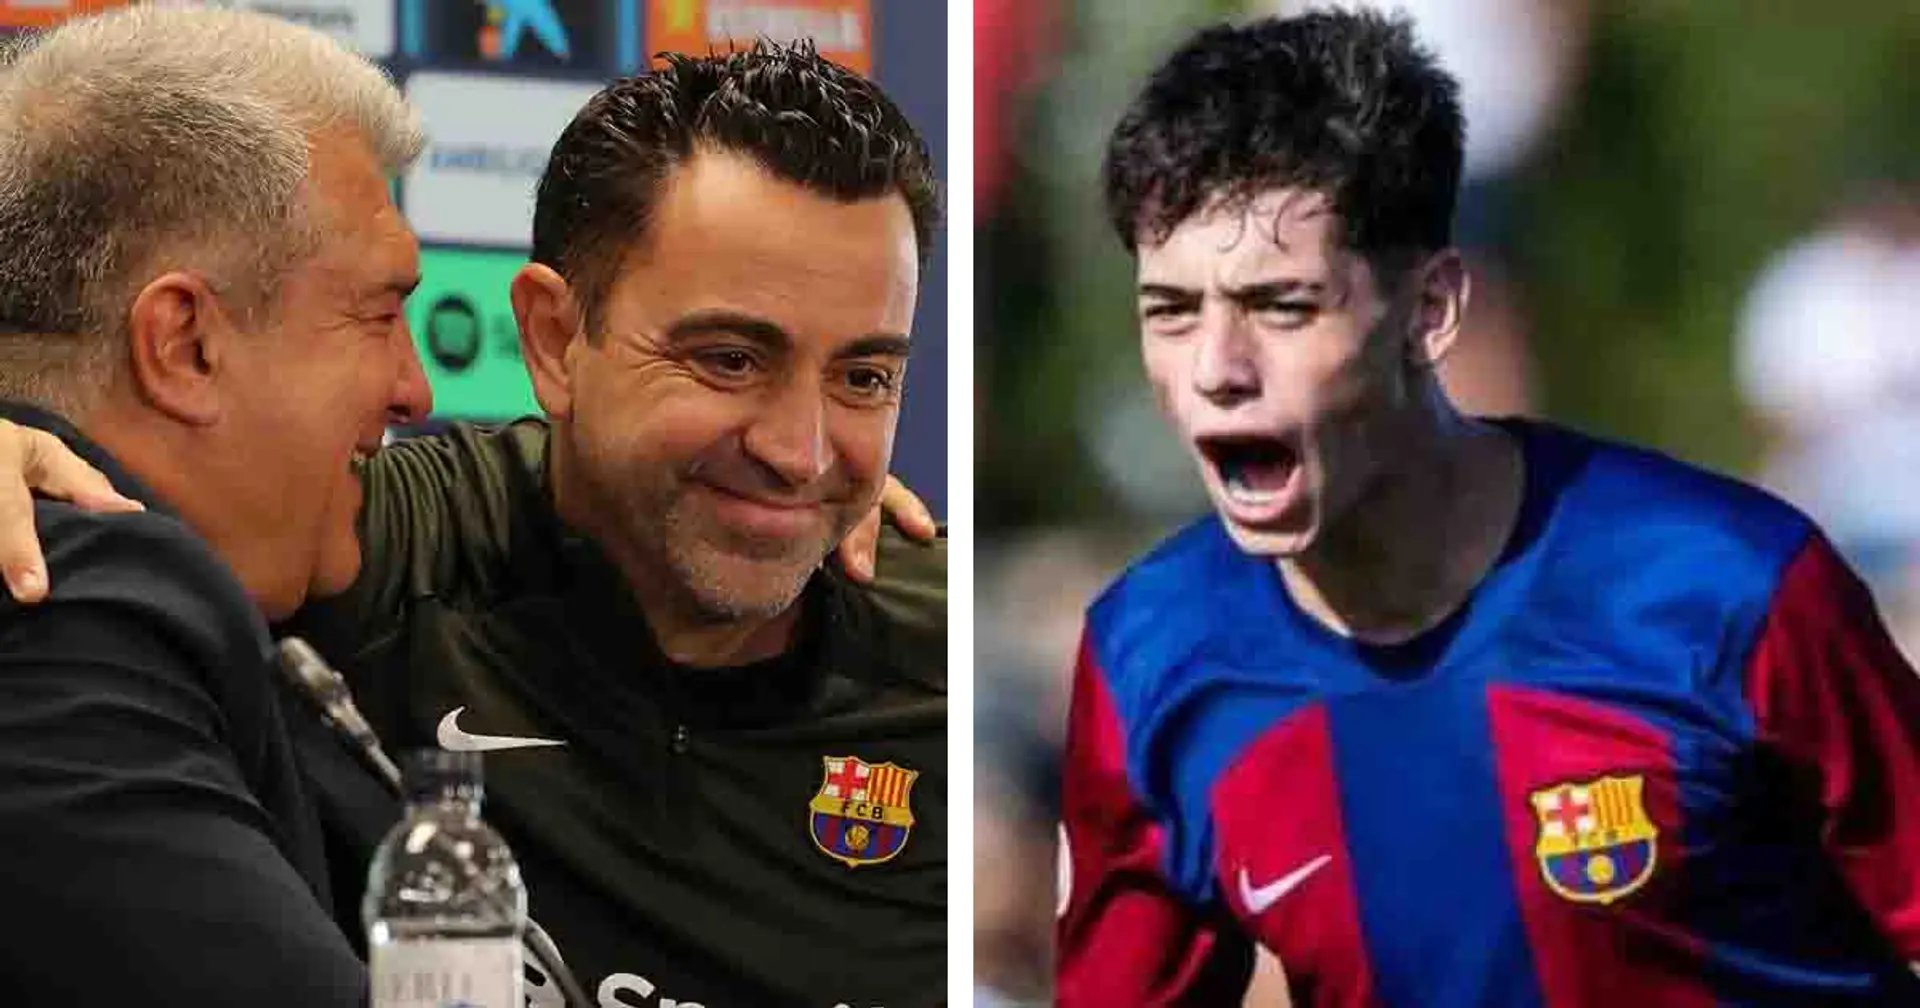 Barca negotiating to hand new contract to academy striker named as 'no. 9 of the future'